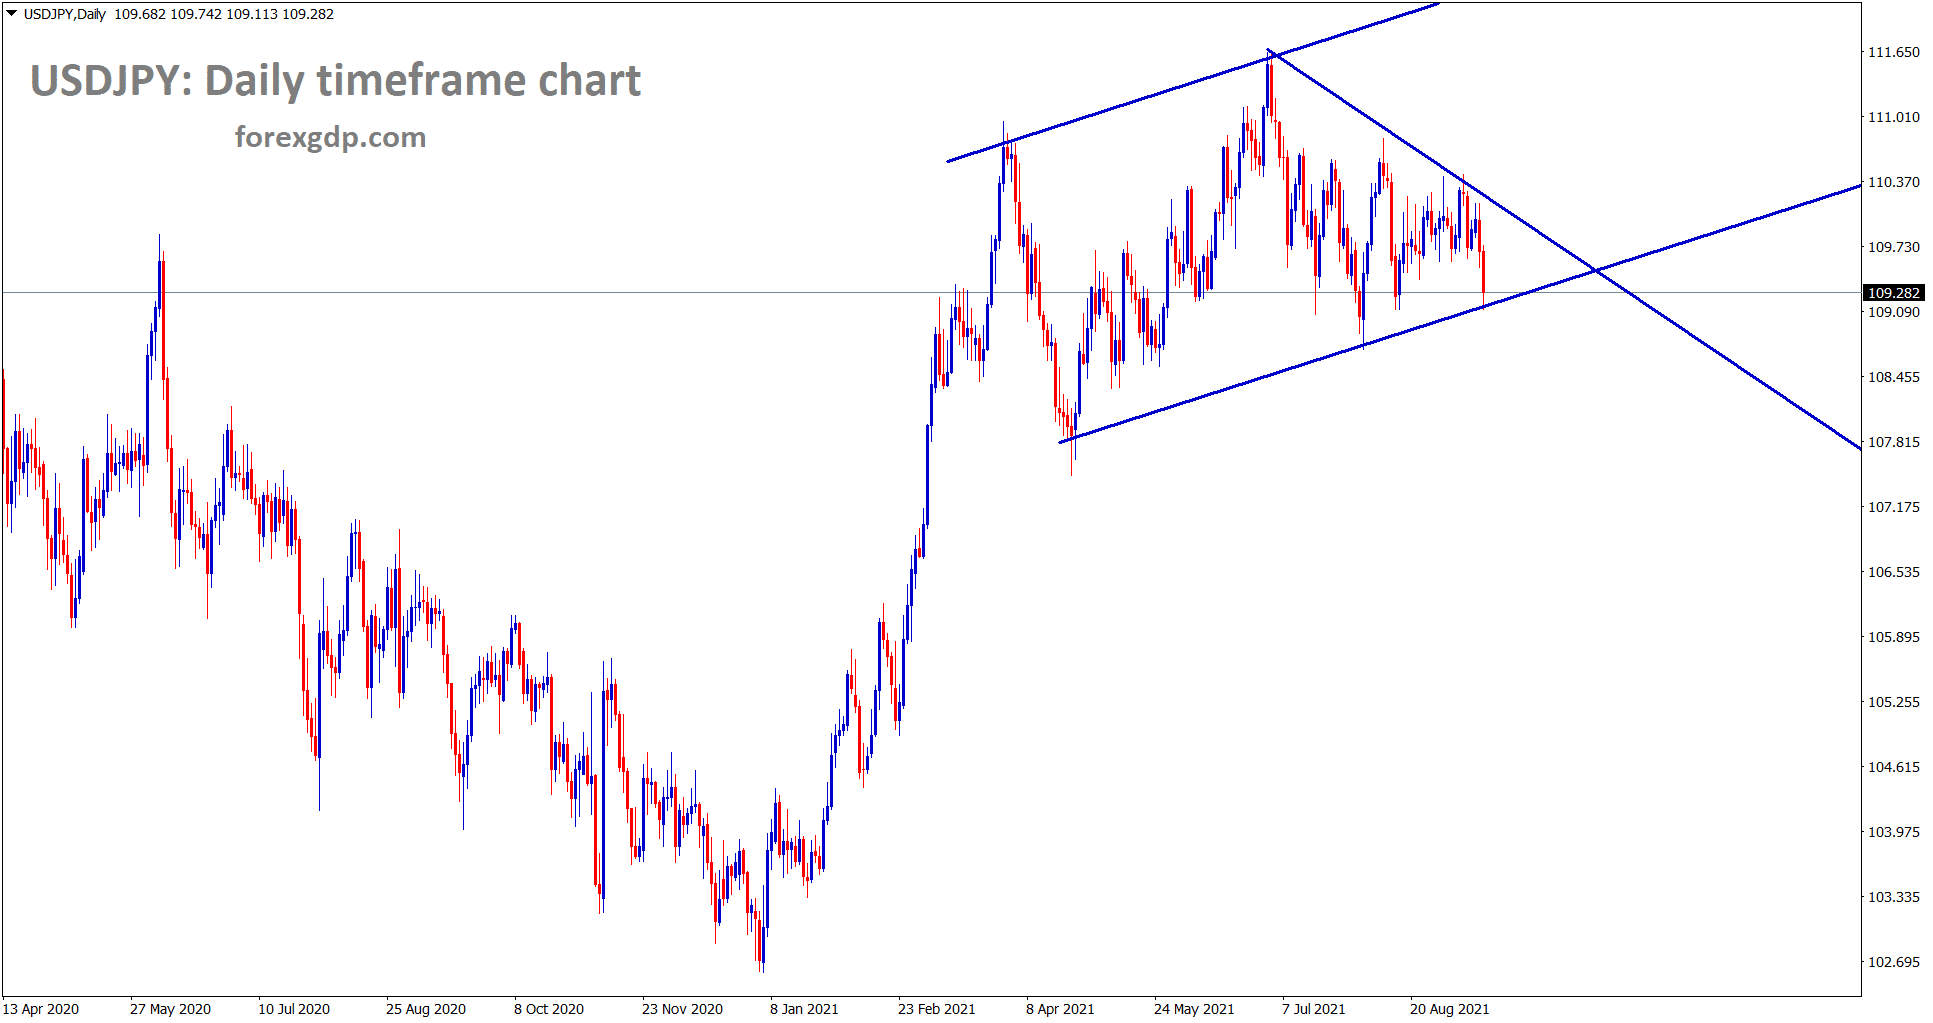 USDJPY is standing at the higher low level of a channel range